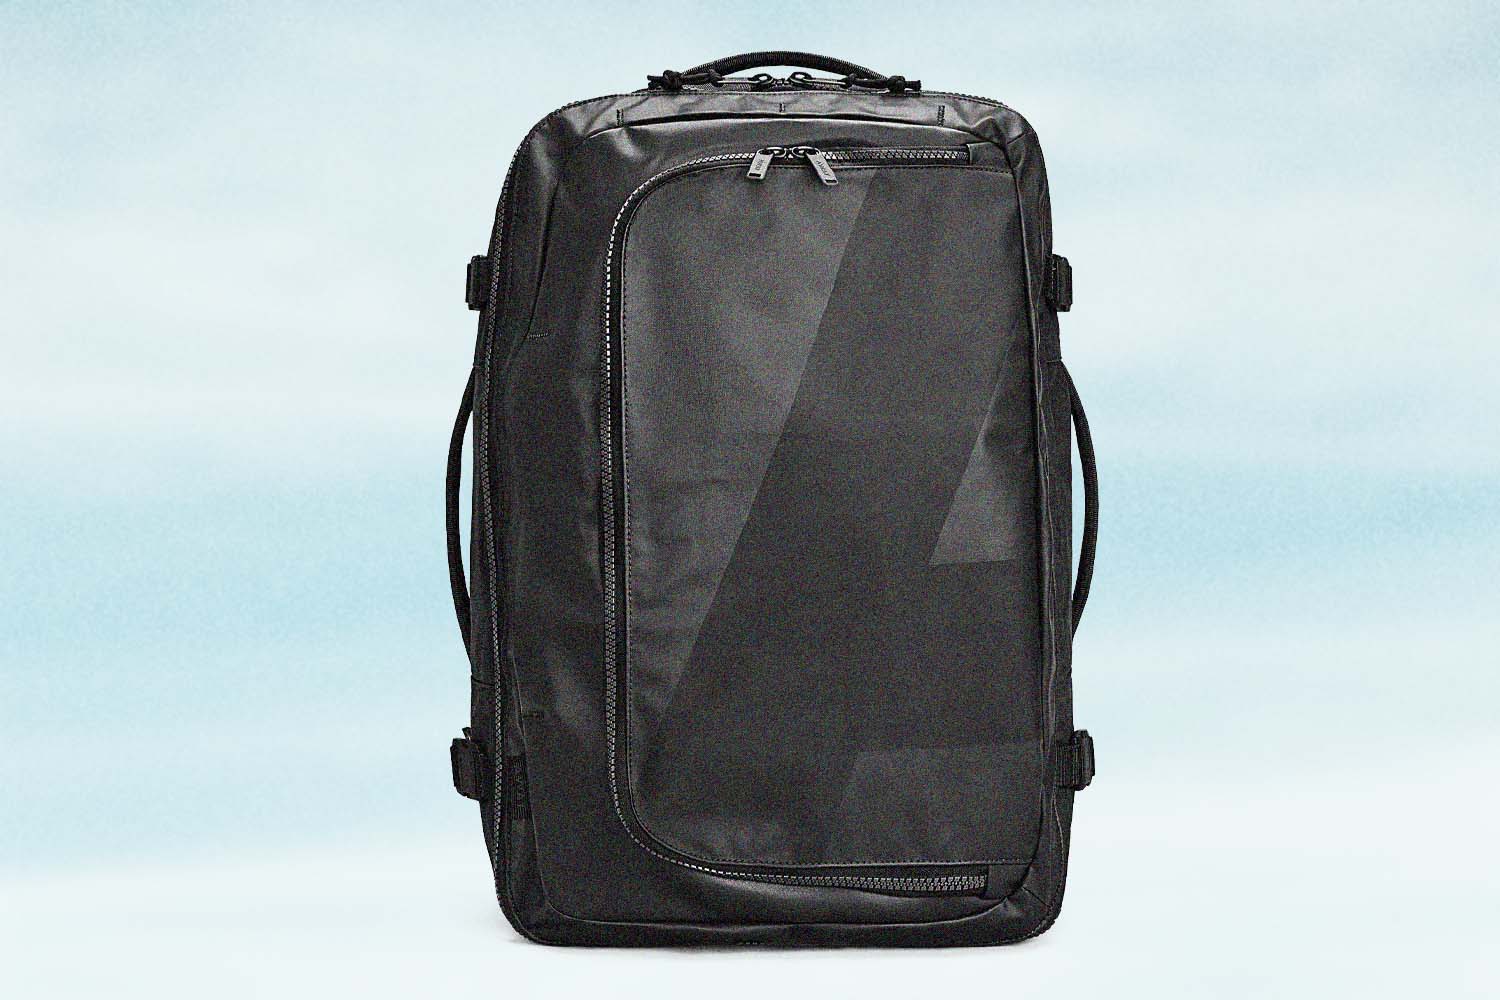 F.A.R Convertible Backpack 45L in Black